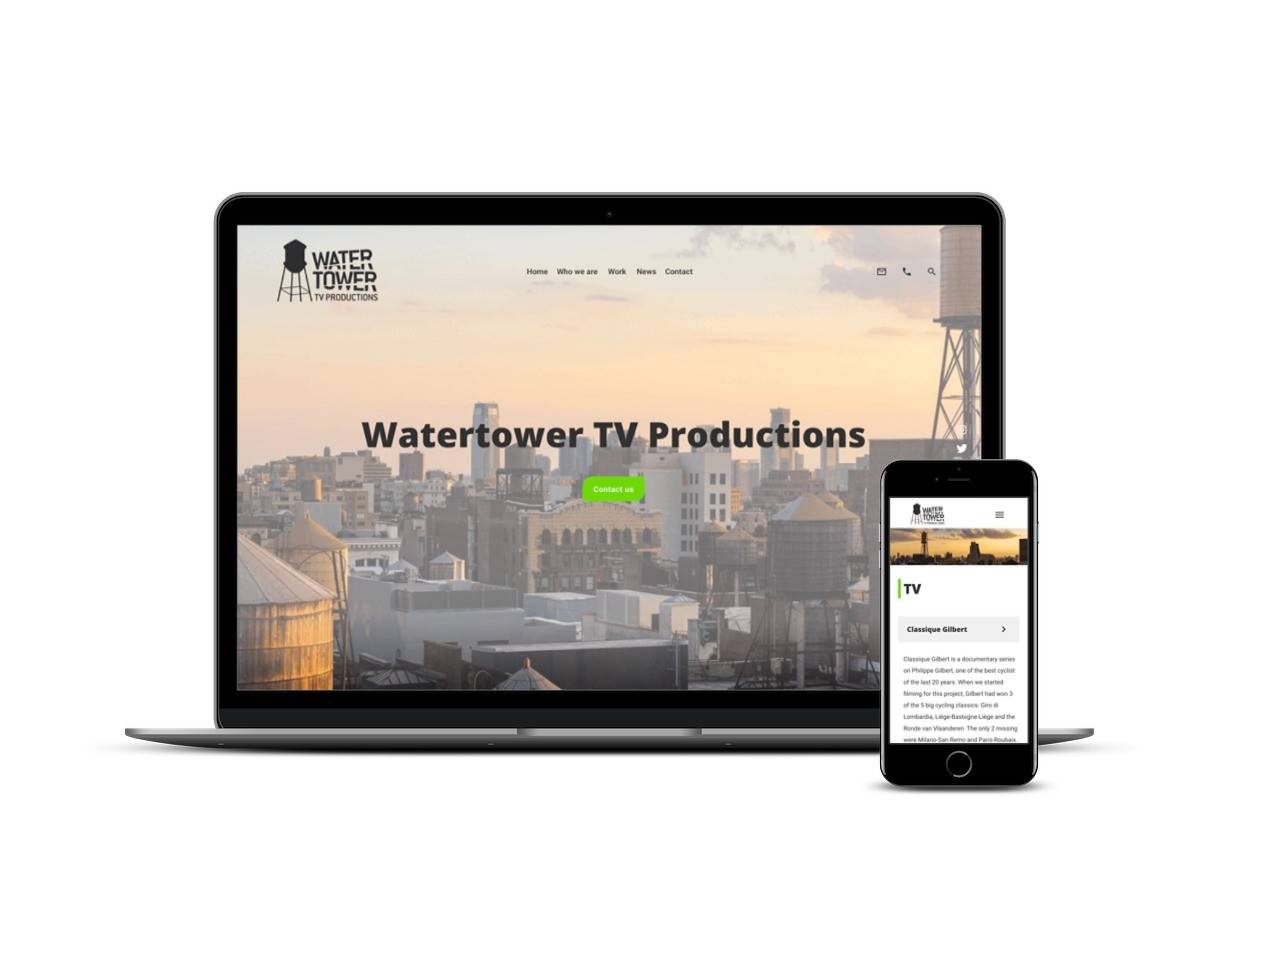 Watertower TV Productions